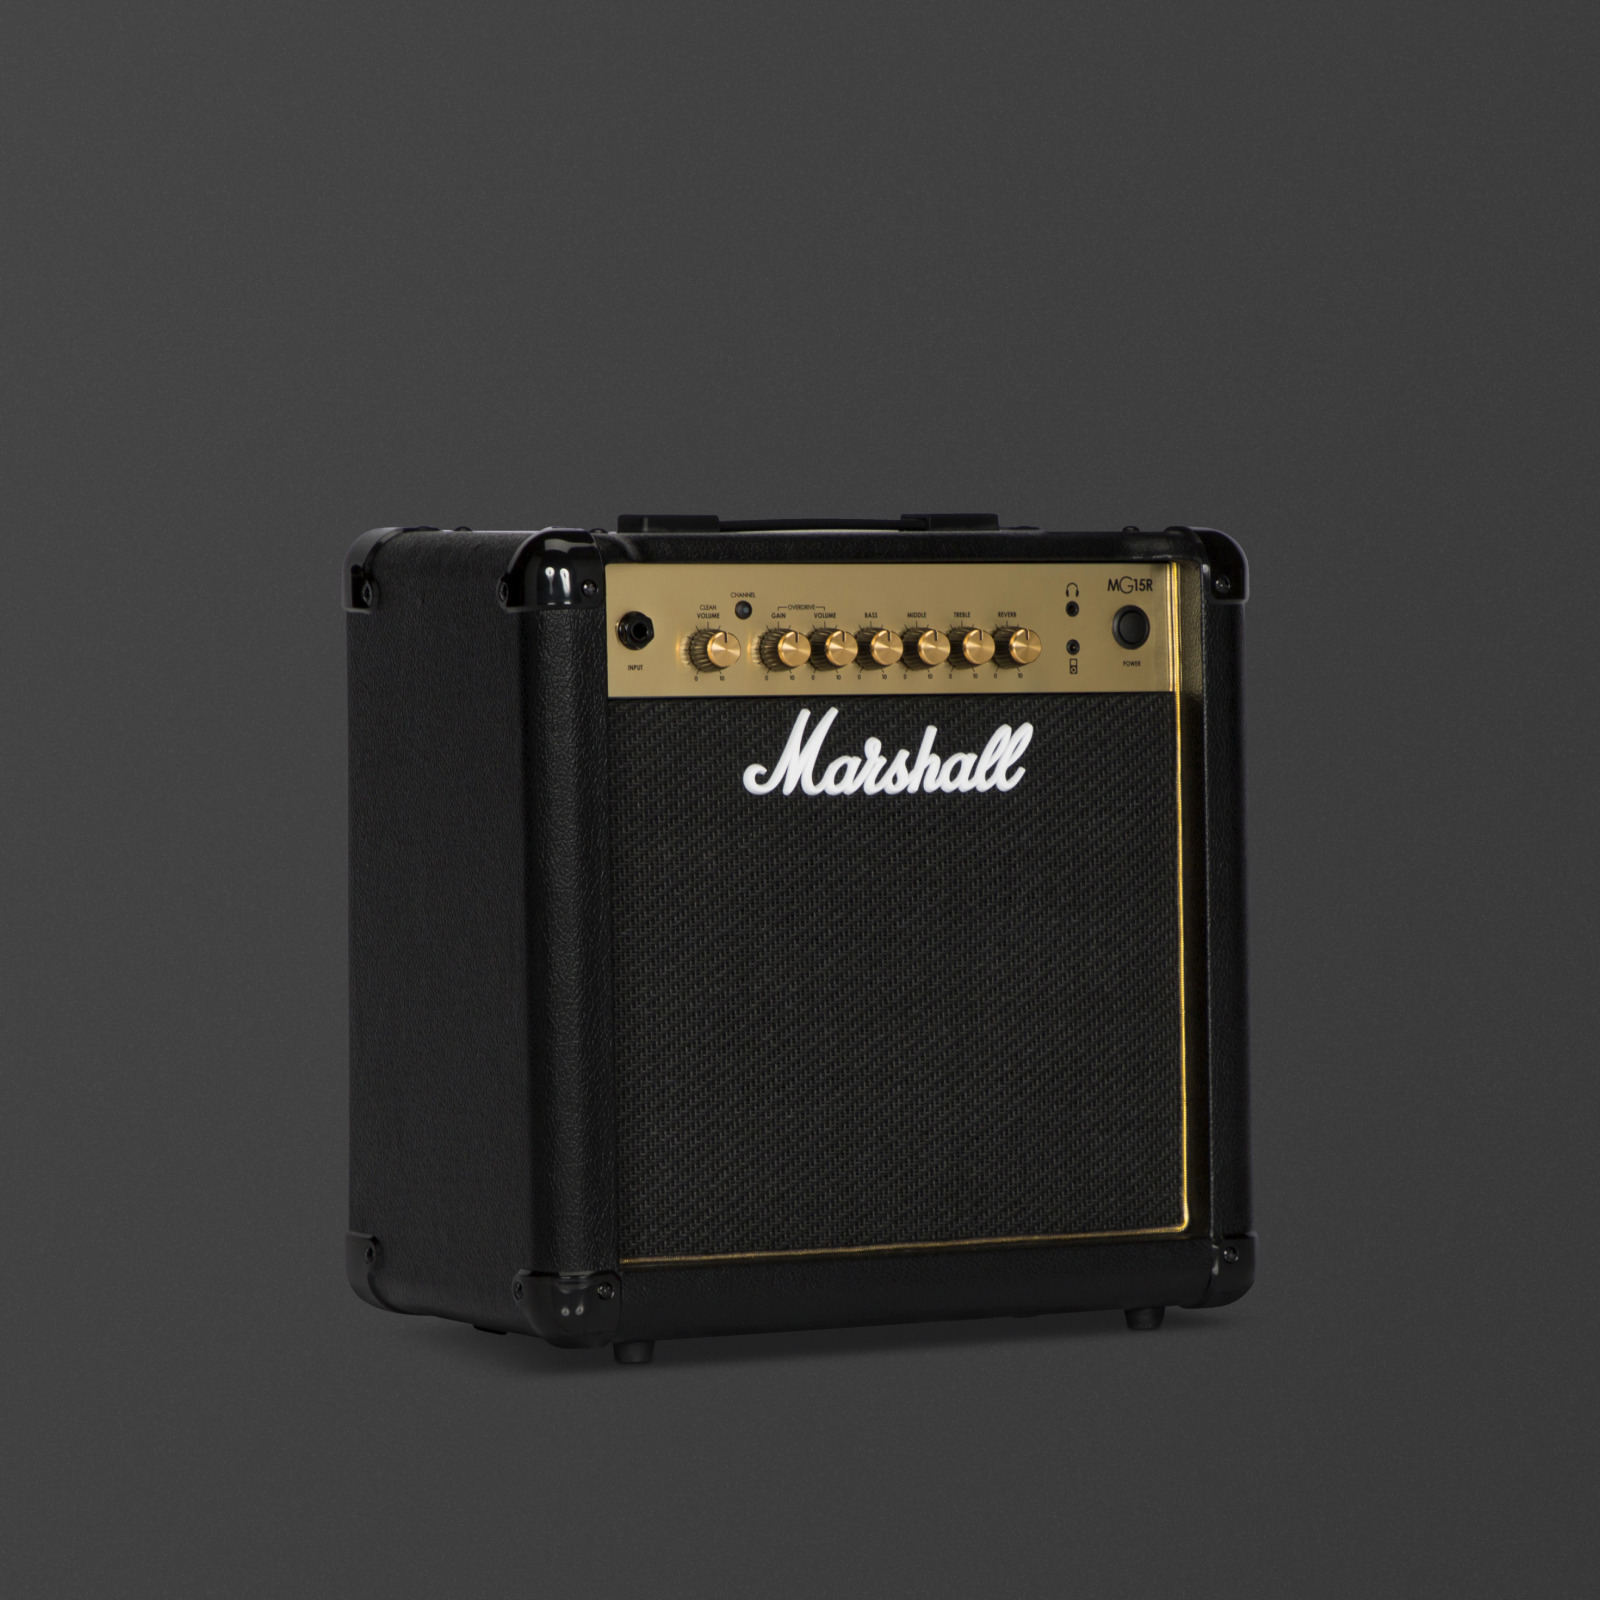 Left side view of the Marshall MG15GR Combo.